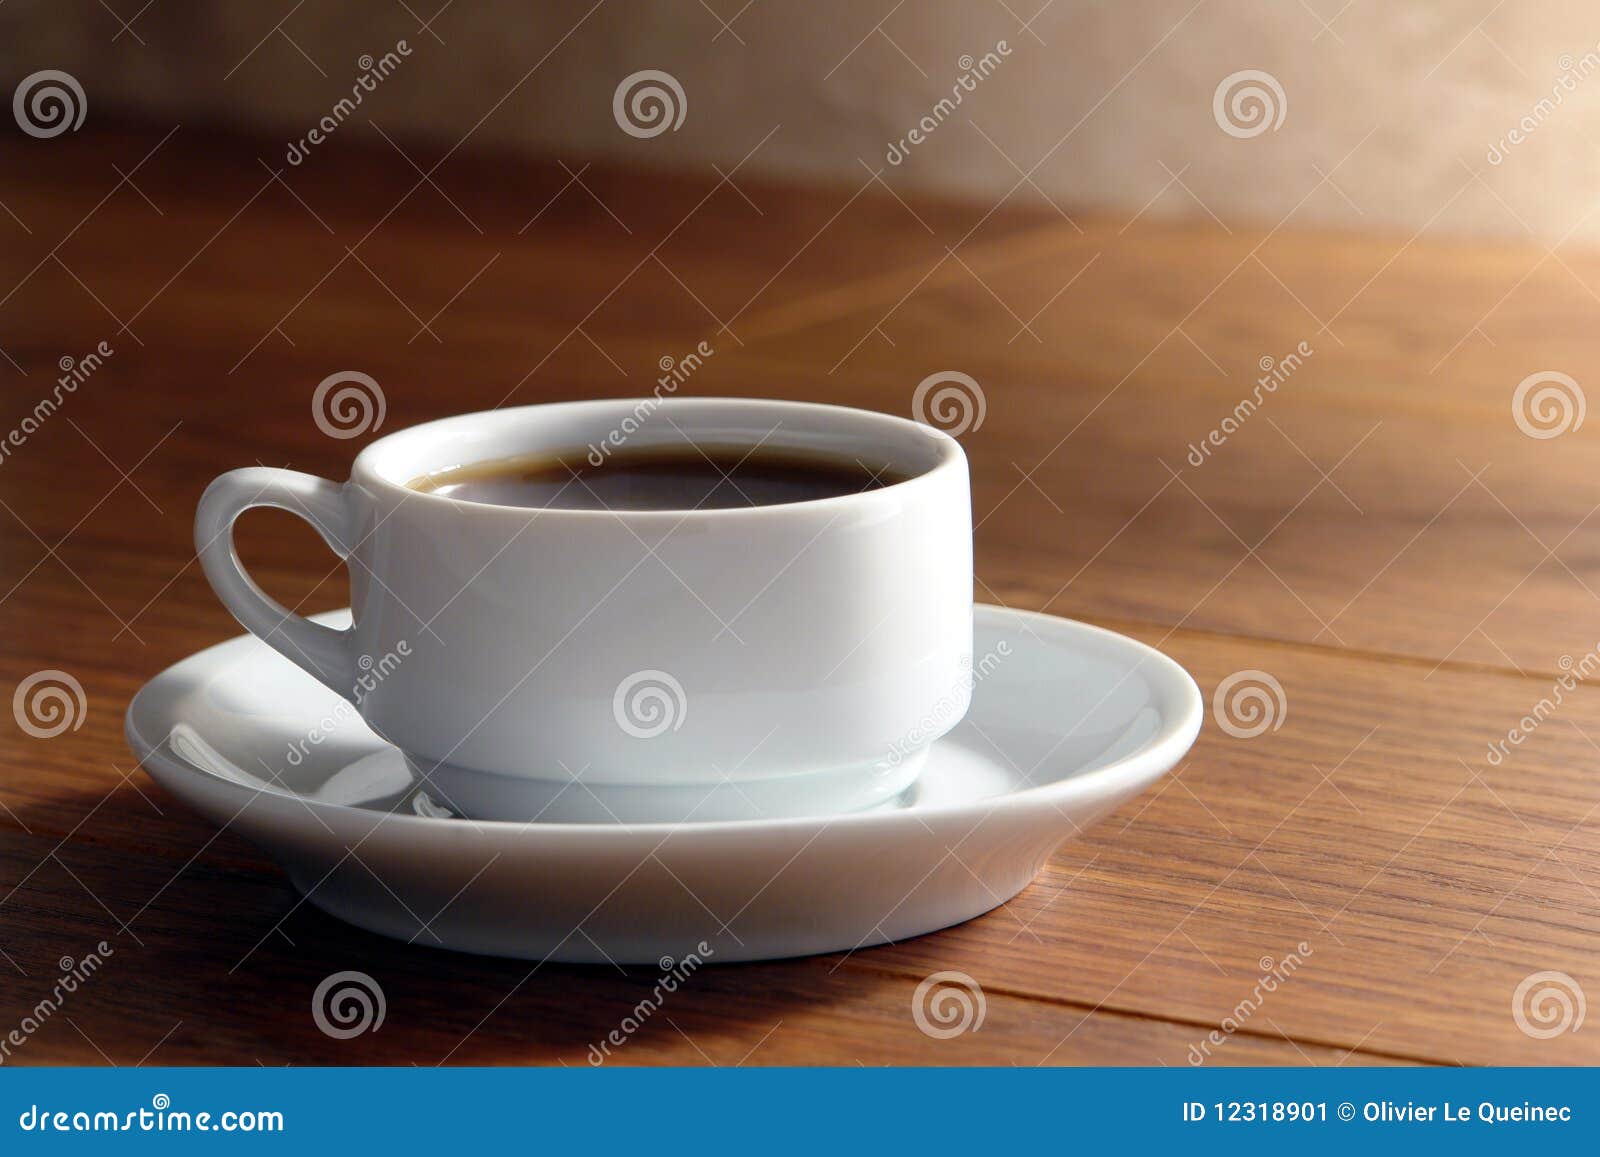 Coffee Cup On Table